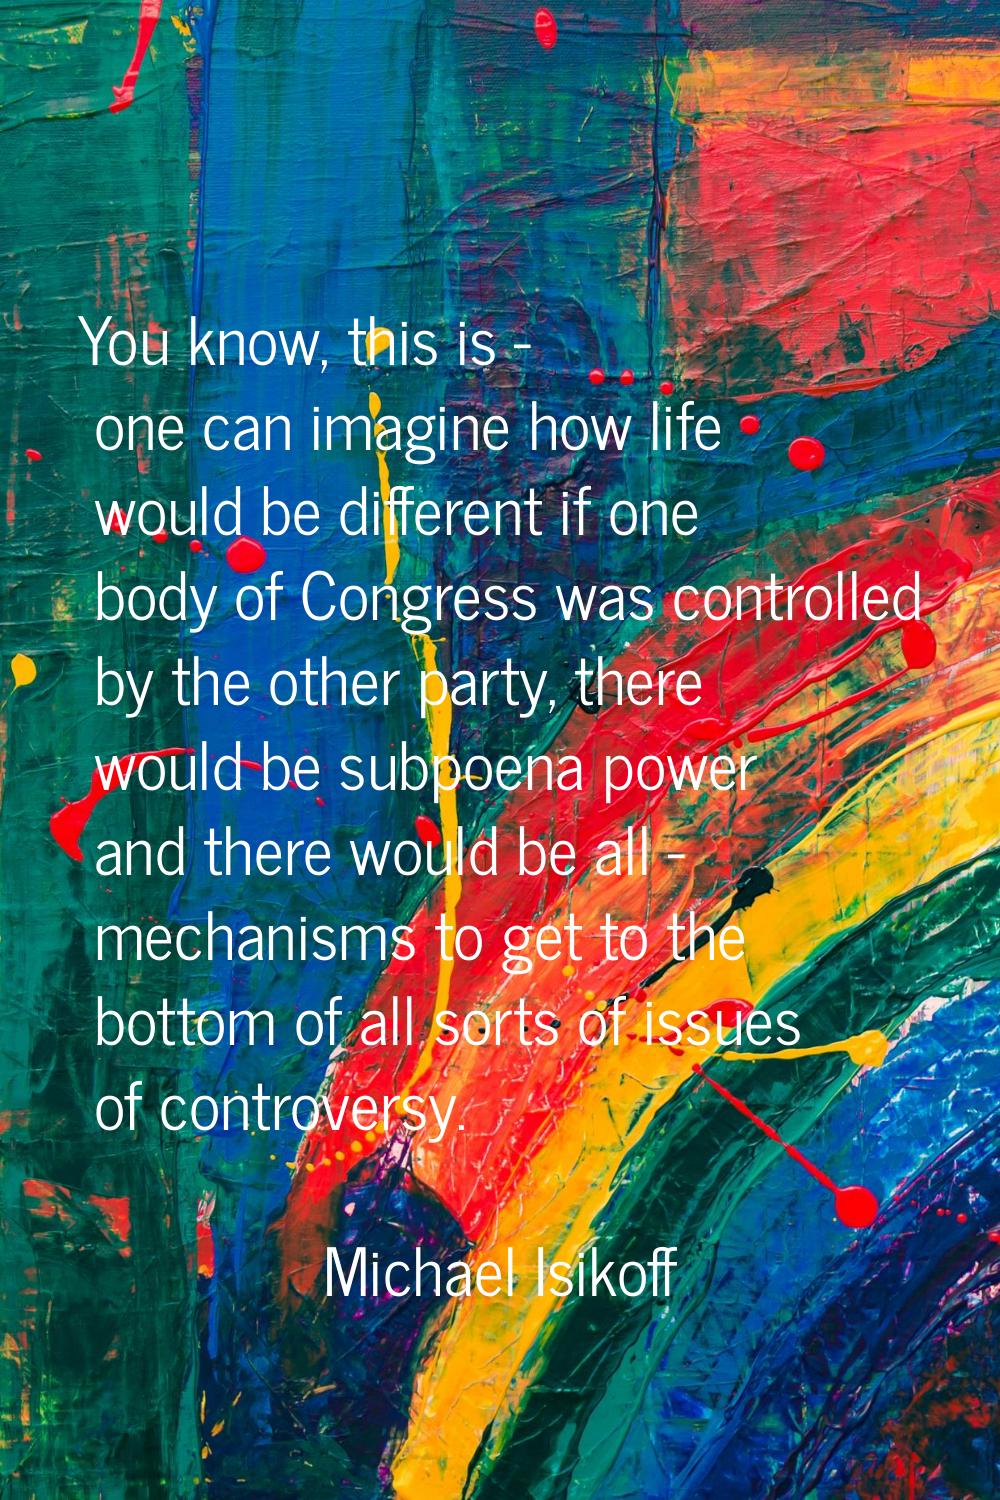 You know, this is - one can imagine how life would be different if one body of Congress was control